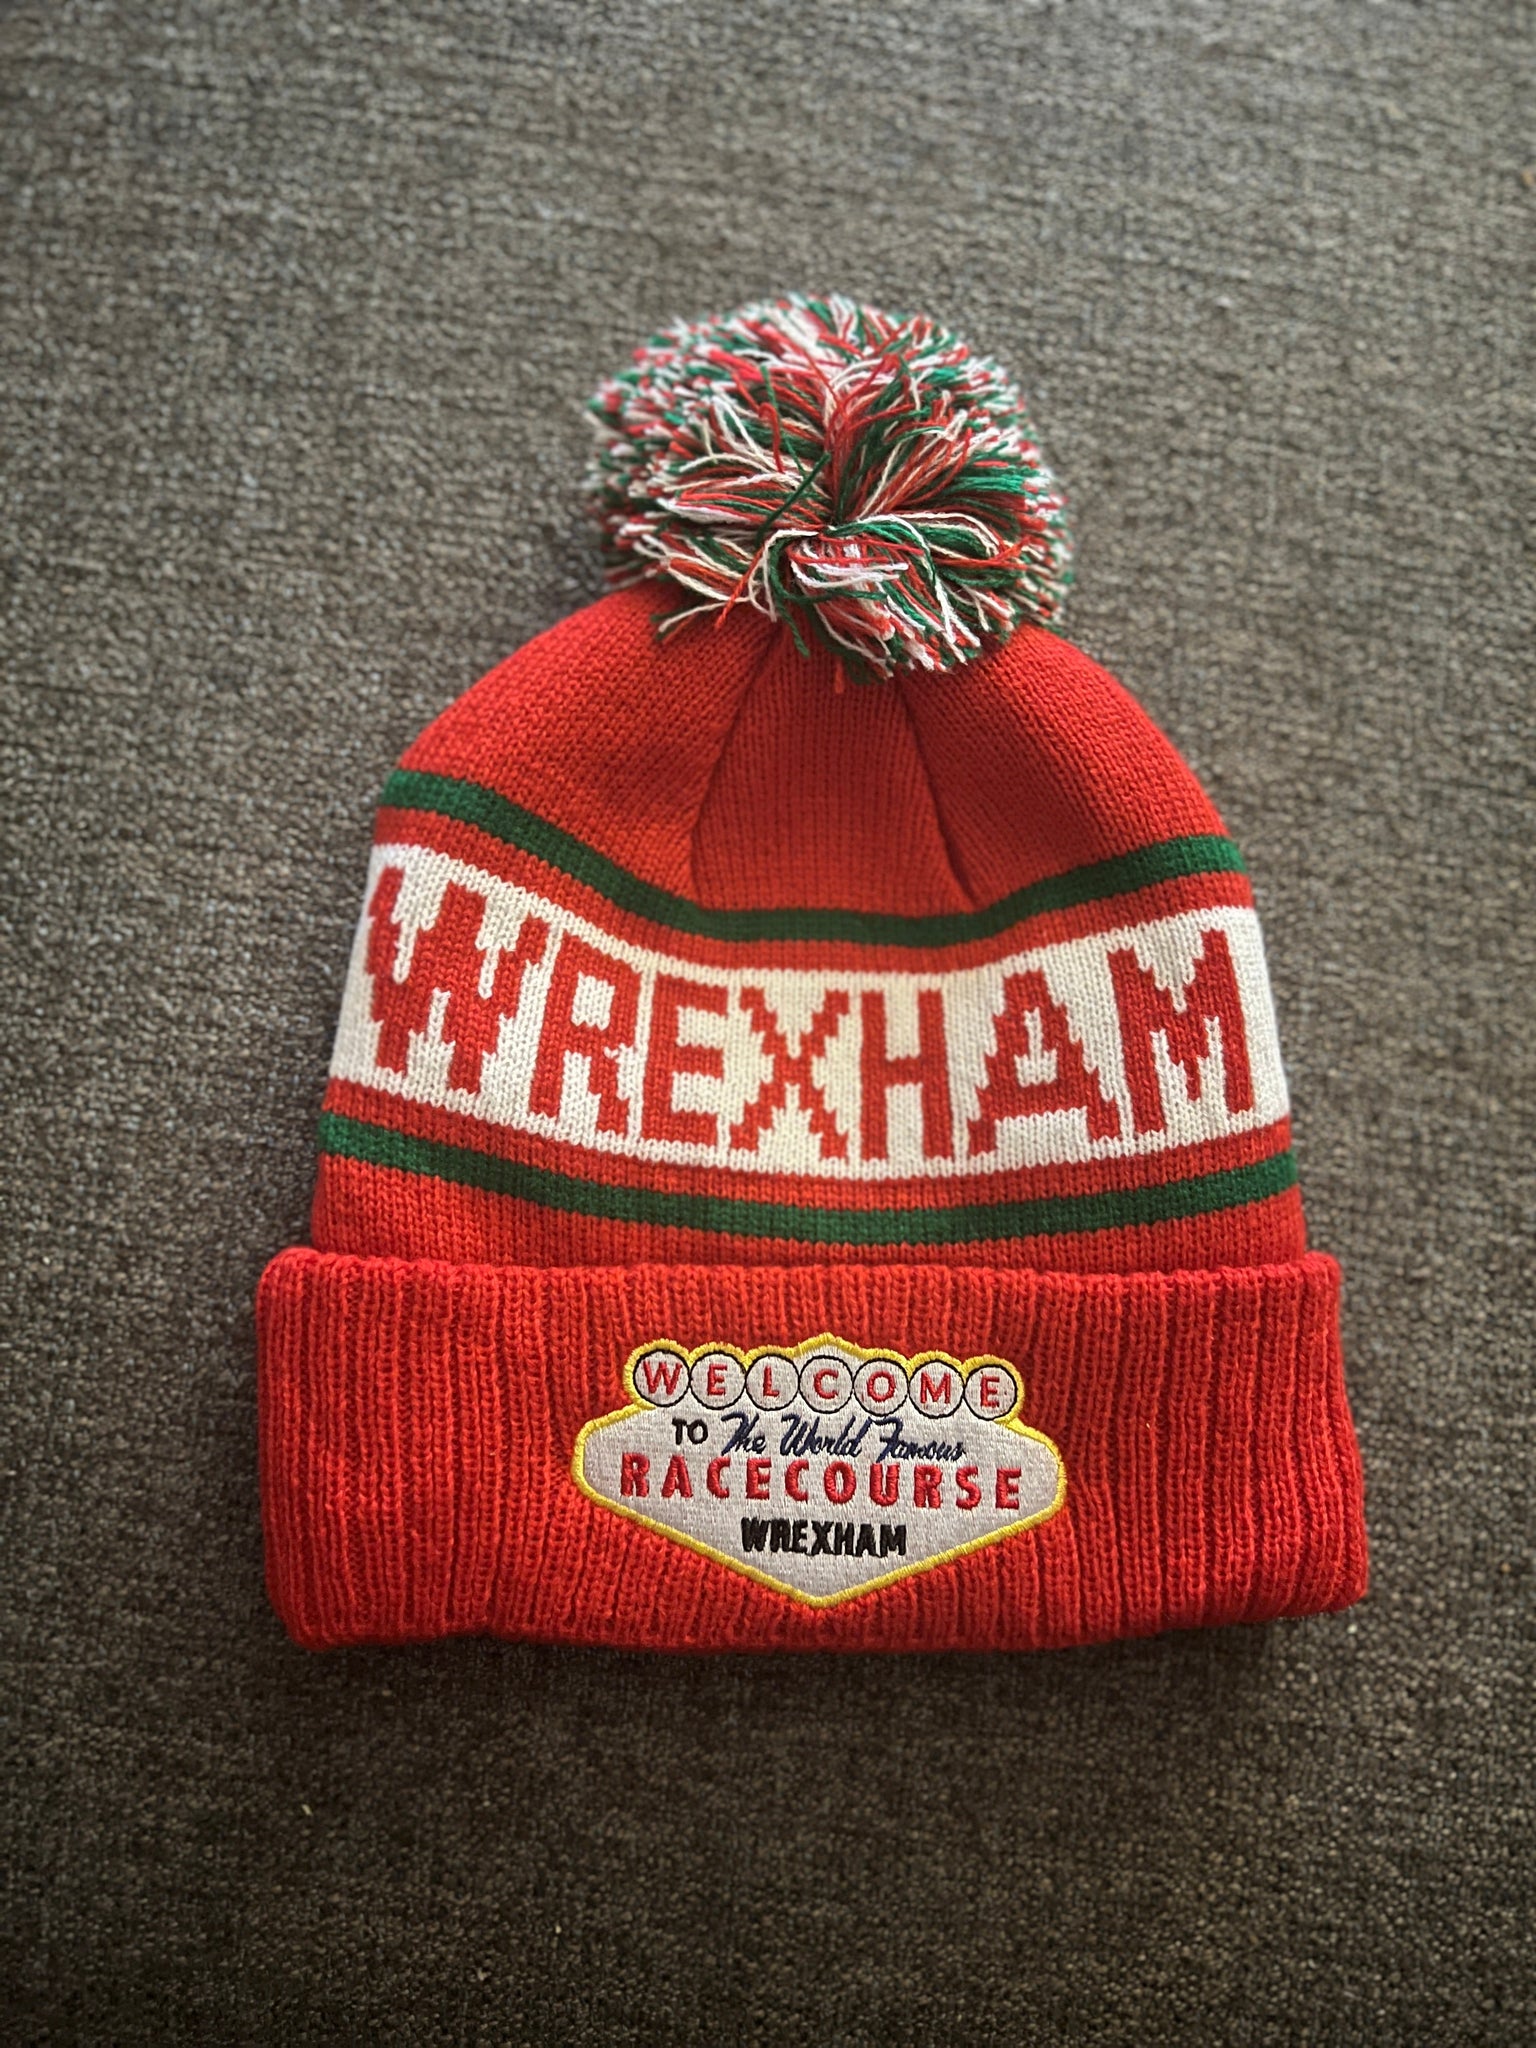 Limited Run World Famous Racecourse Beanie (Red)